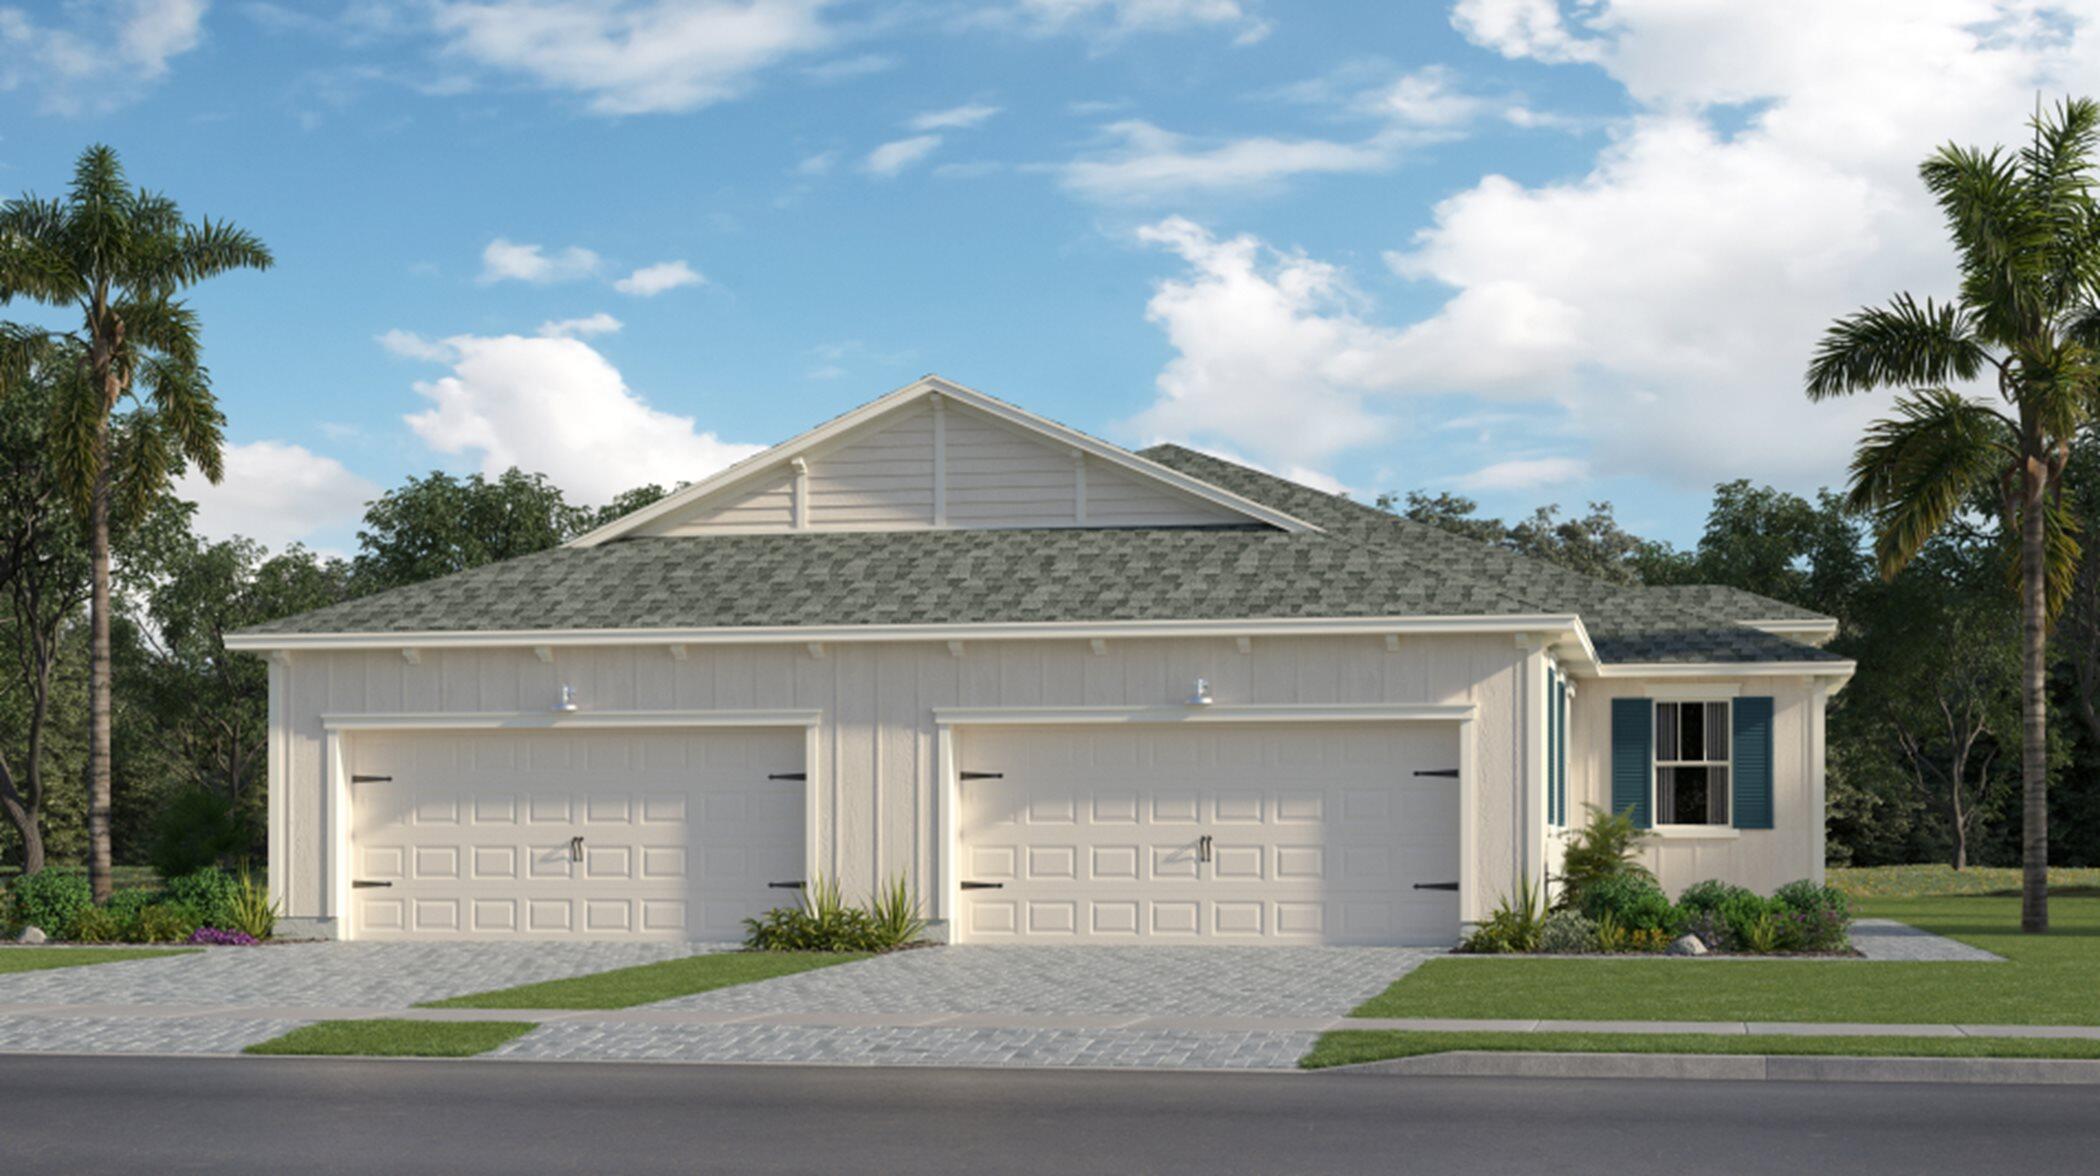 1358 Tangled Orchard Trace, Loxahatchee, Palm Beach County, Florida - 2 Bedrooms  
2 Bathrooms - 